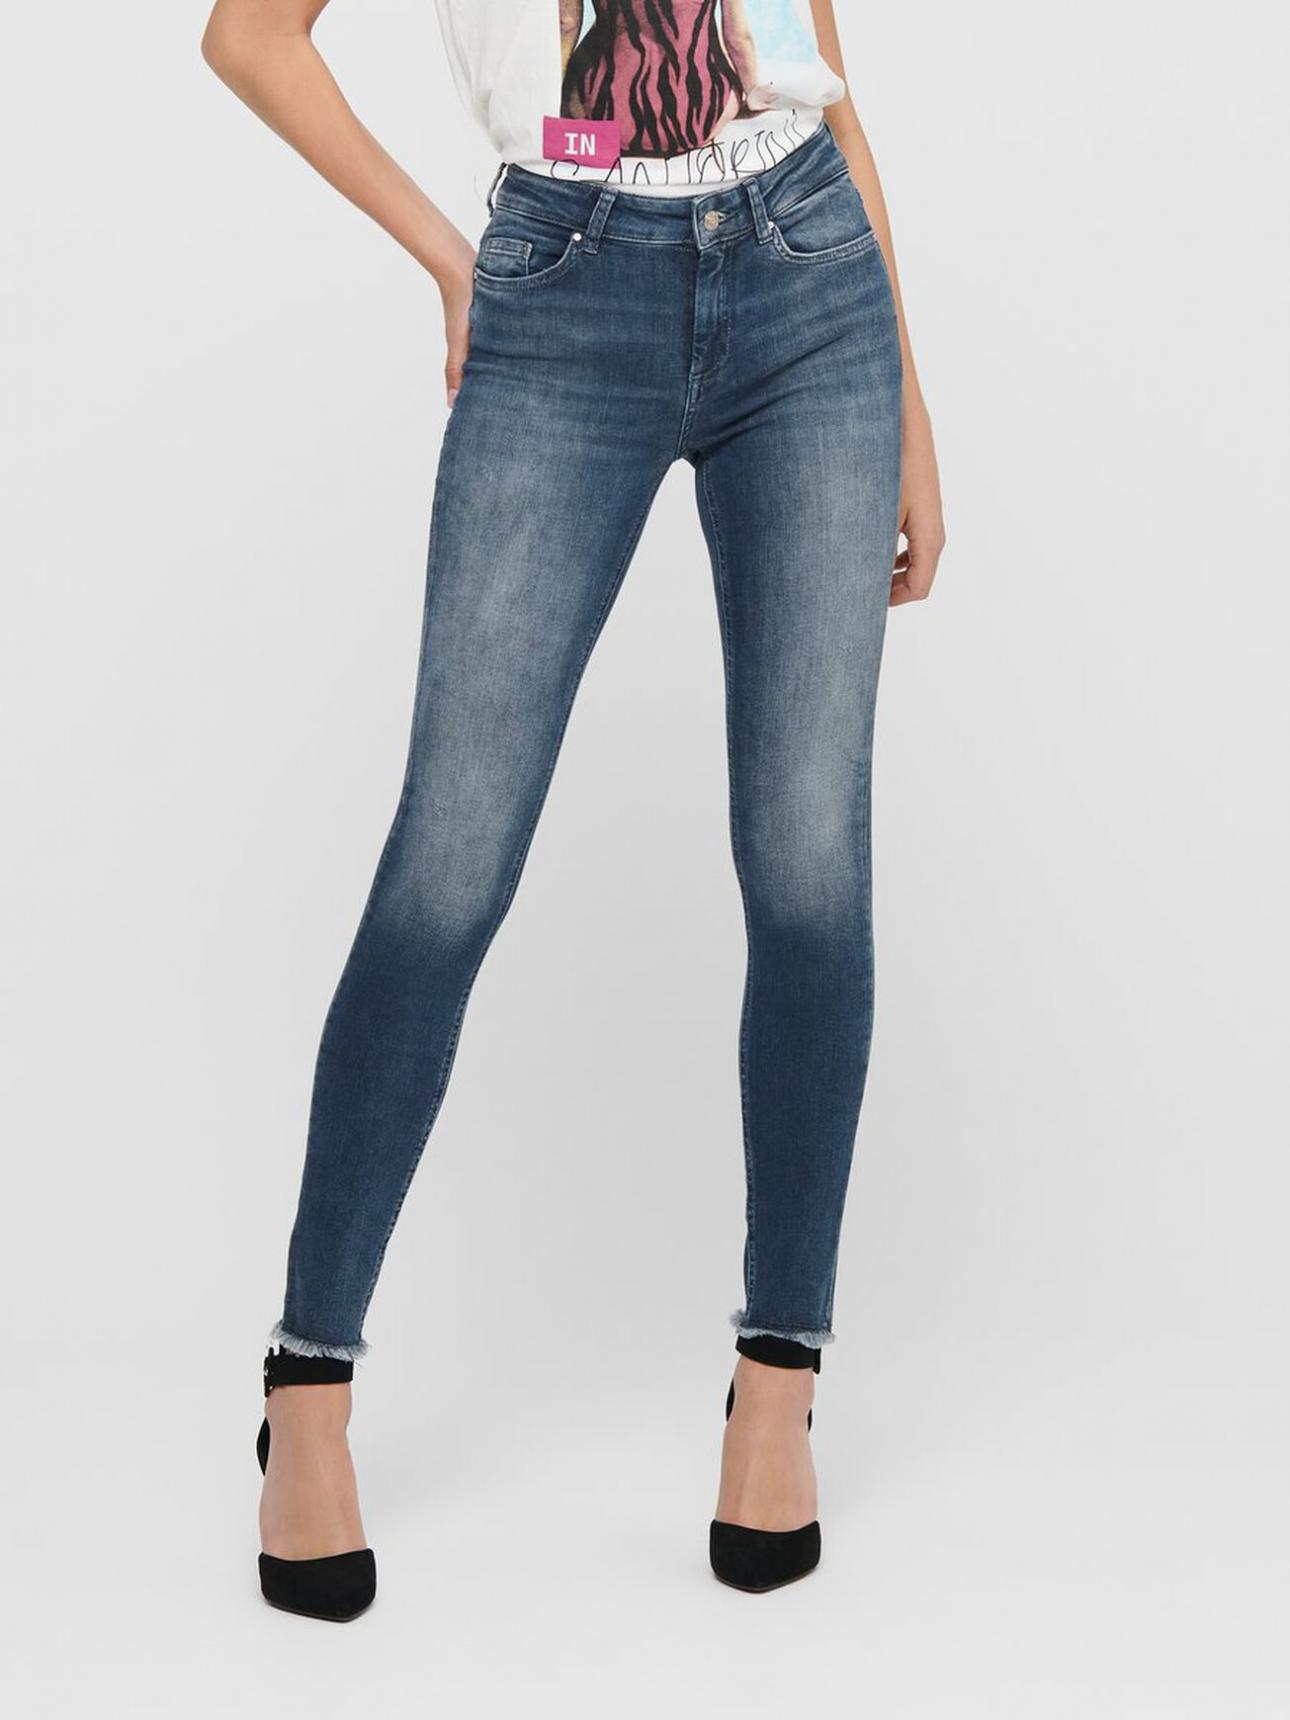 raket Nat sted Citere Dame ONLY Jeans | ONLBLUSH LIFE MID ANKLE SKINNY FIT JEANS Blue · Whittier  Lock And Key